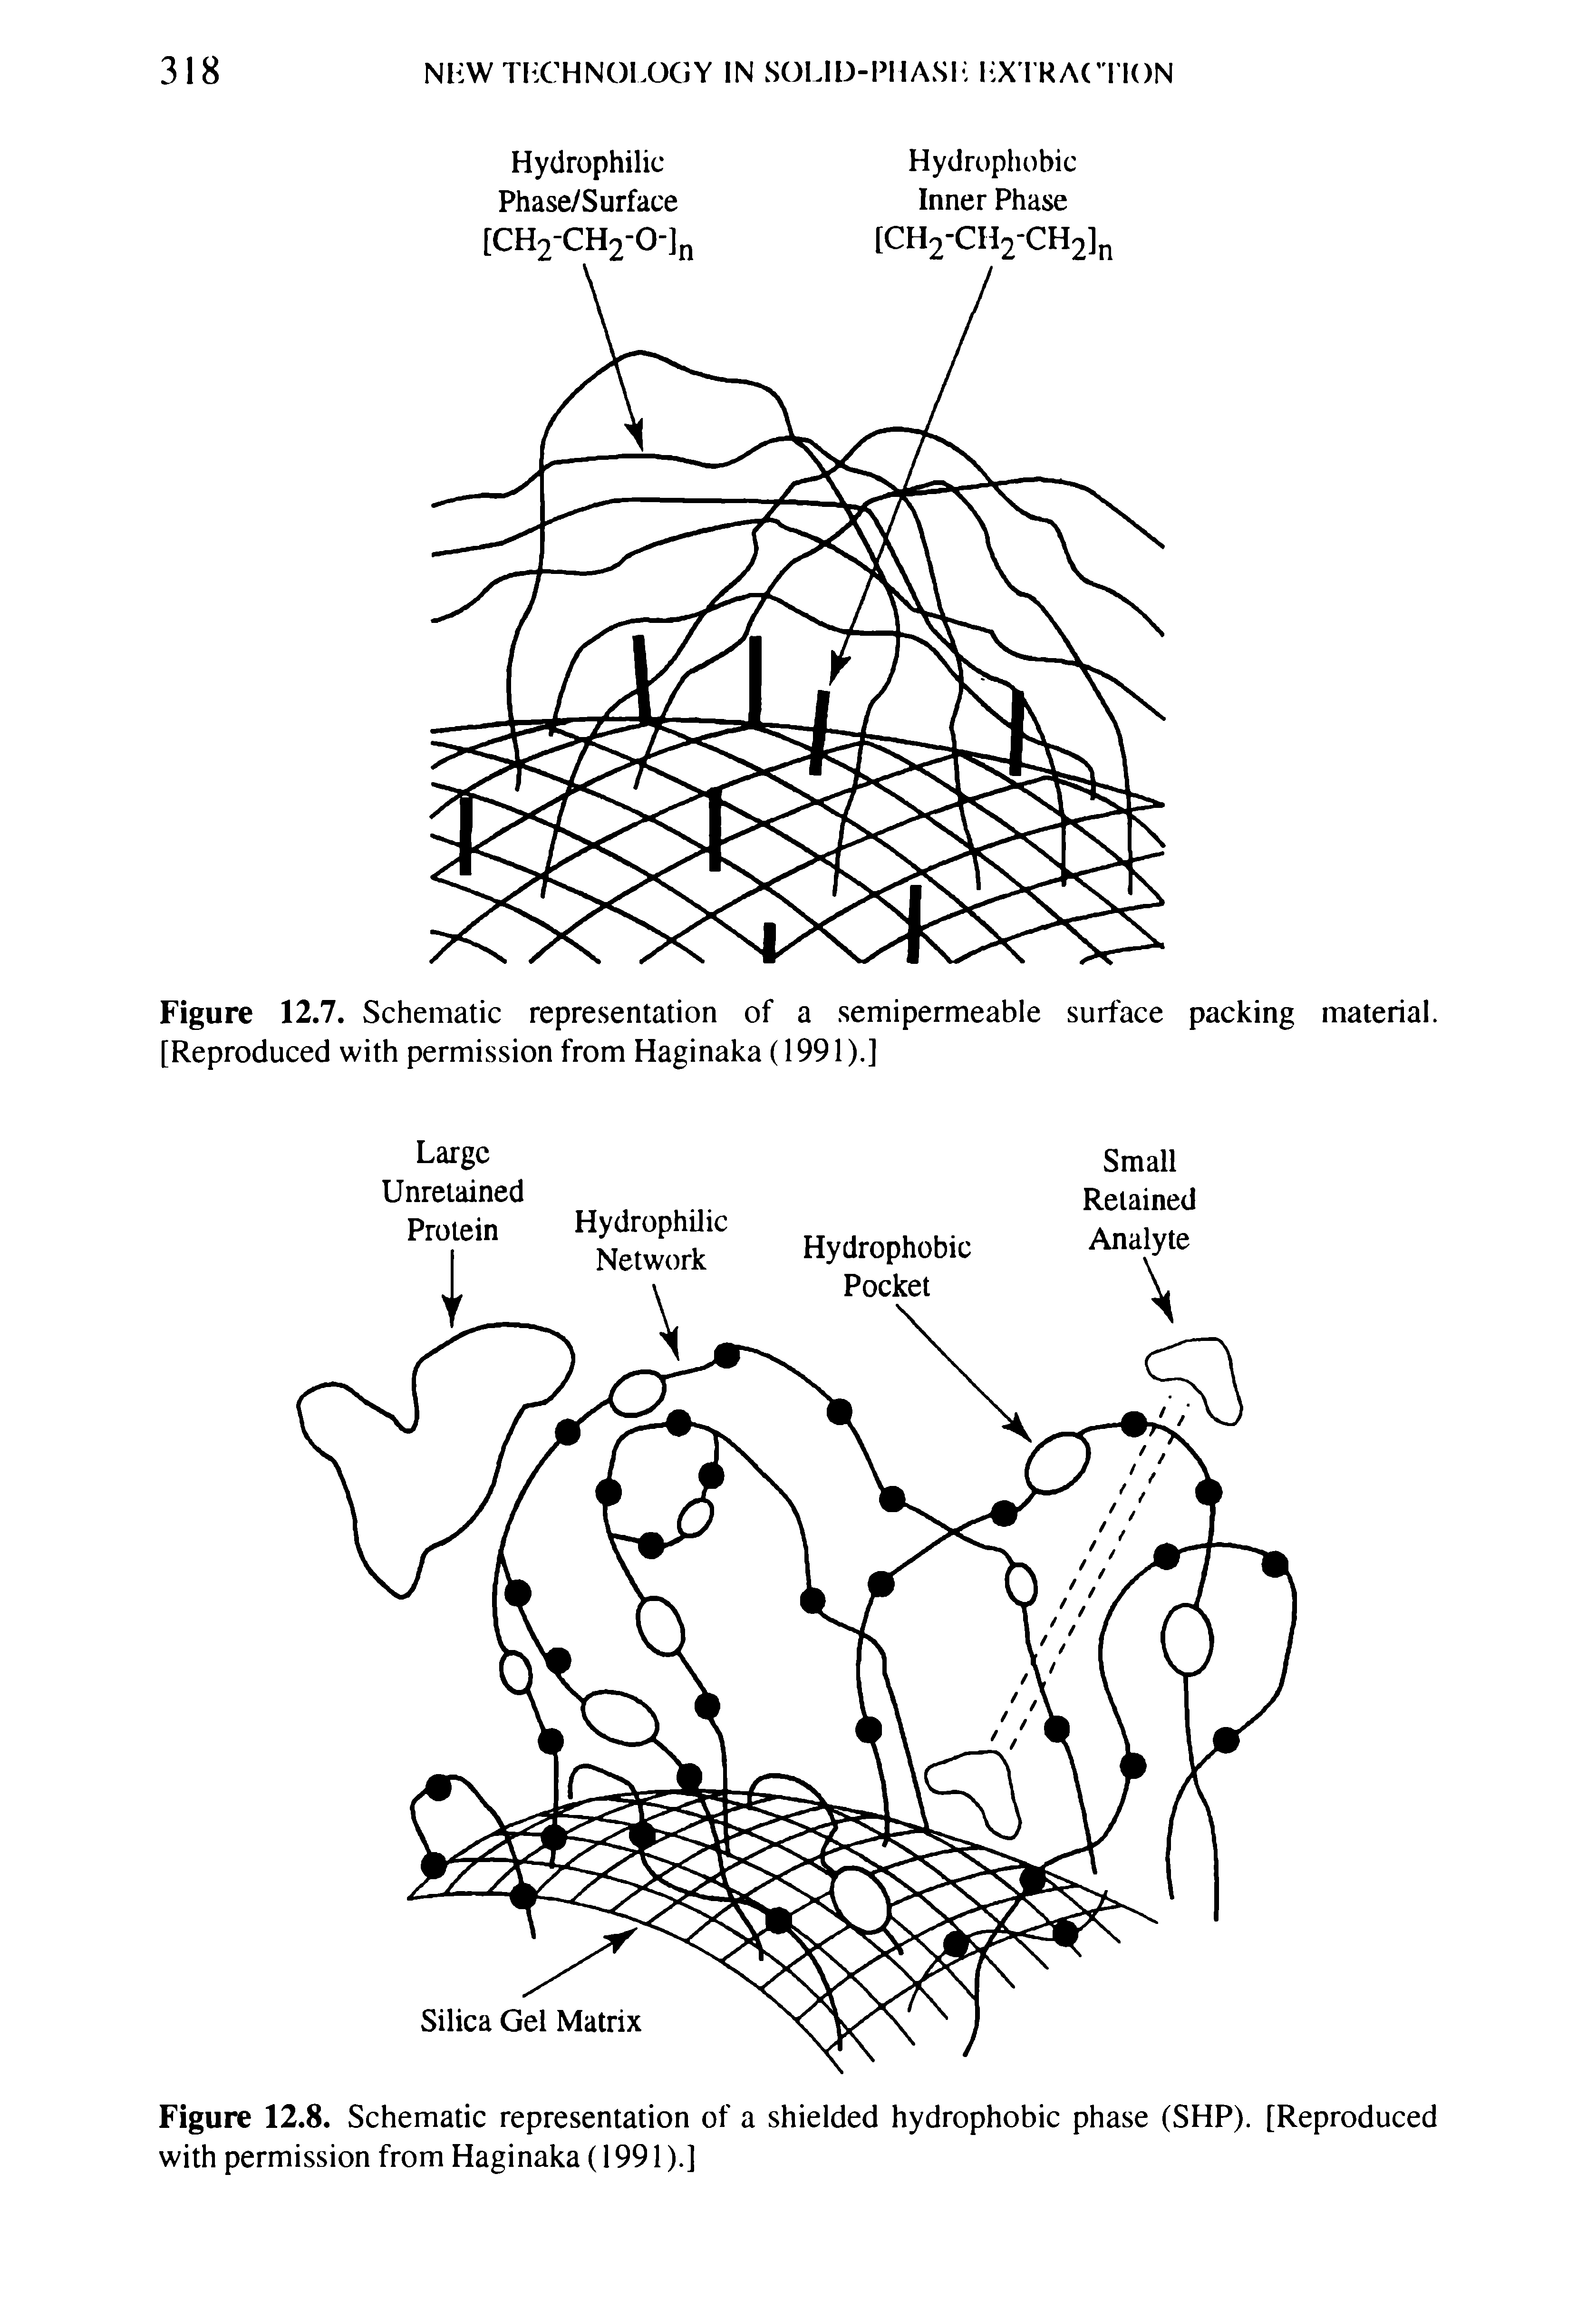 Figure 12.7. Schematic representation of a semipermeable surface packing material. [Reproduced with permission from Haginaka (1991).]...